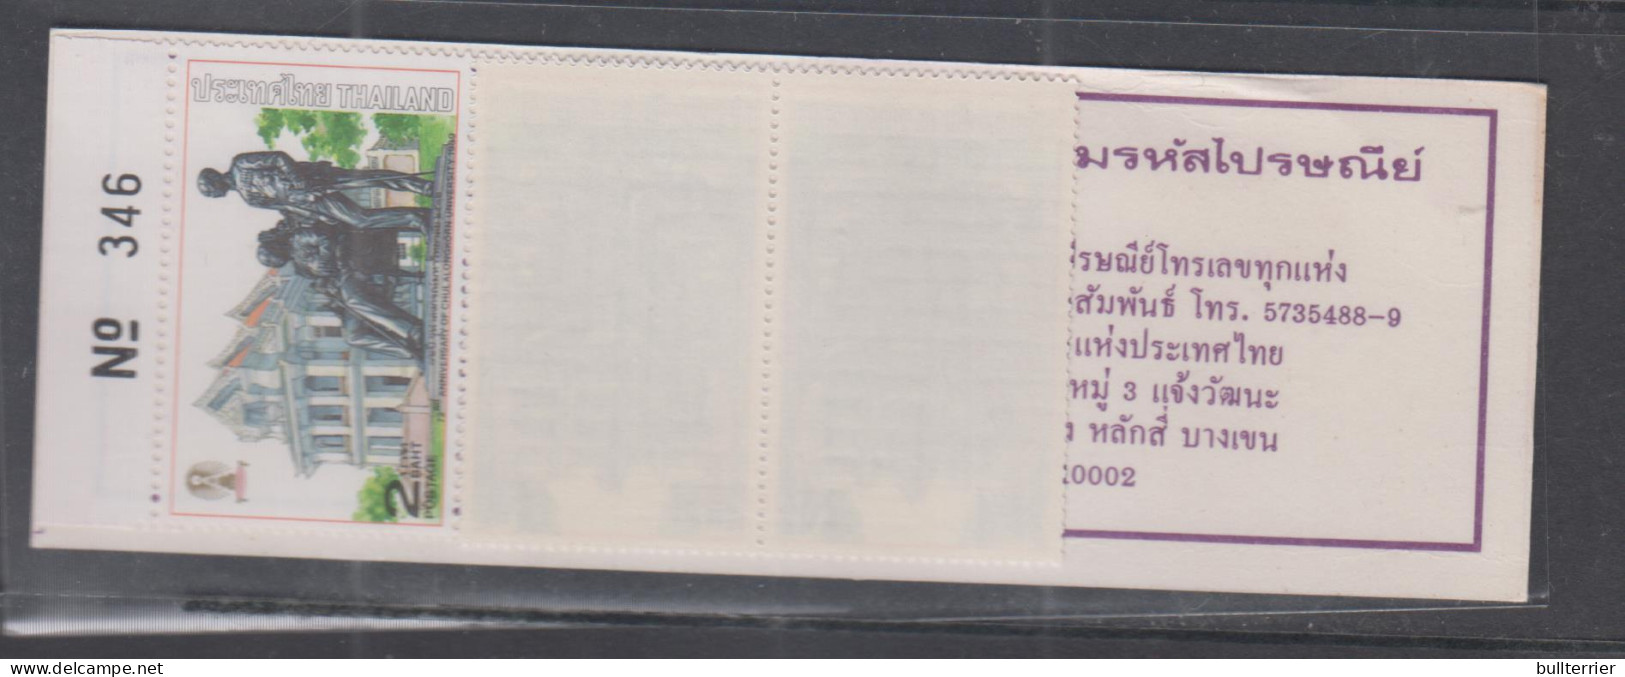 THAILAND - 1989 - CHULALONGKORN UNIVERSITY  BOOKLET COMPLETE MINT NEVER HINGED  - Thailand